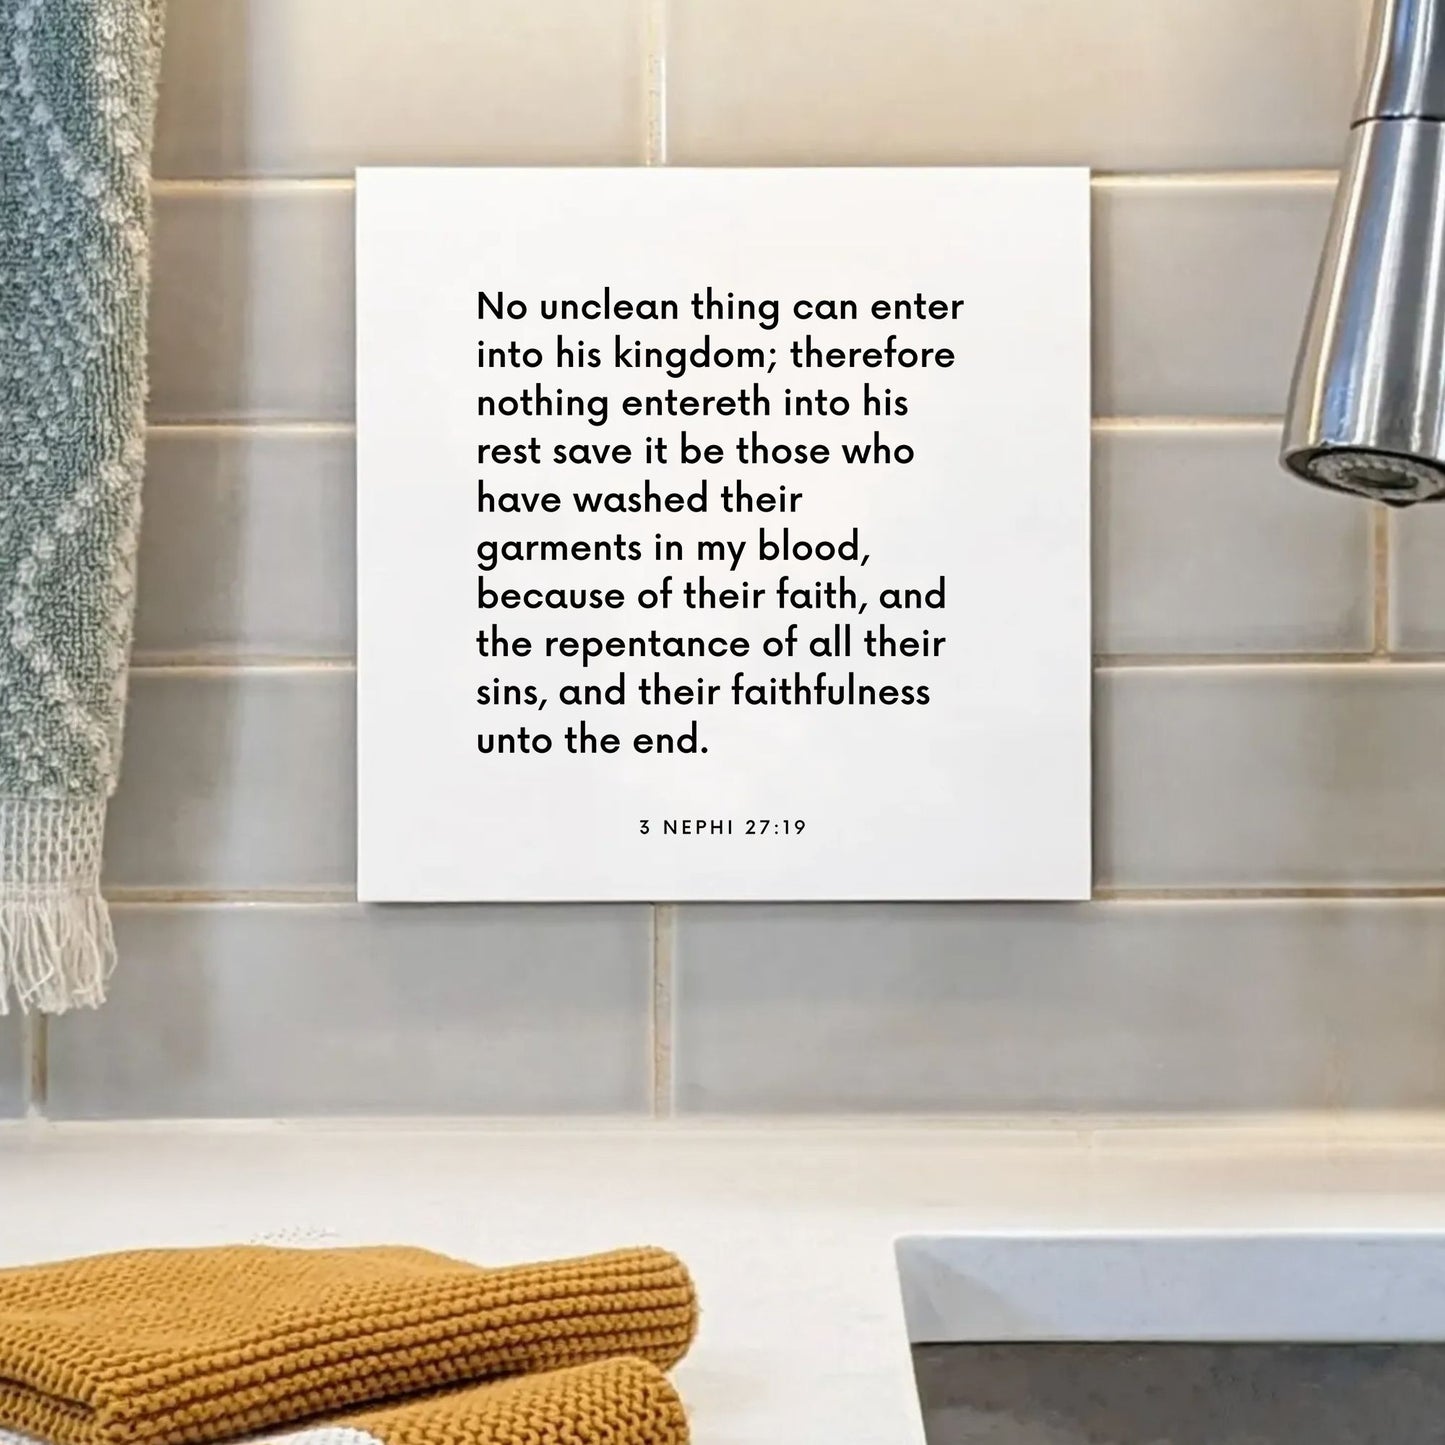 Sink mouting of the scripture tile for 3 Nephi 27:19 - "No unclean thing can enter into his kingdom"